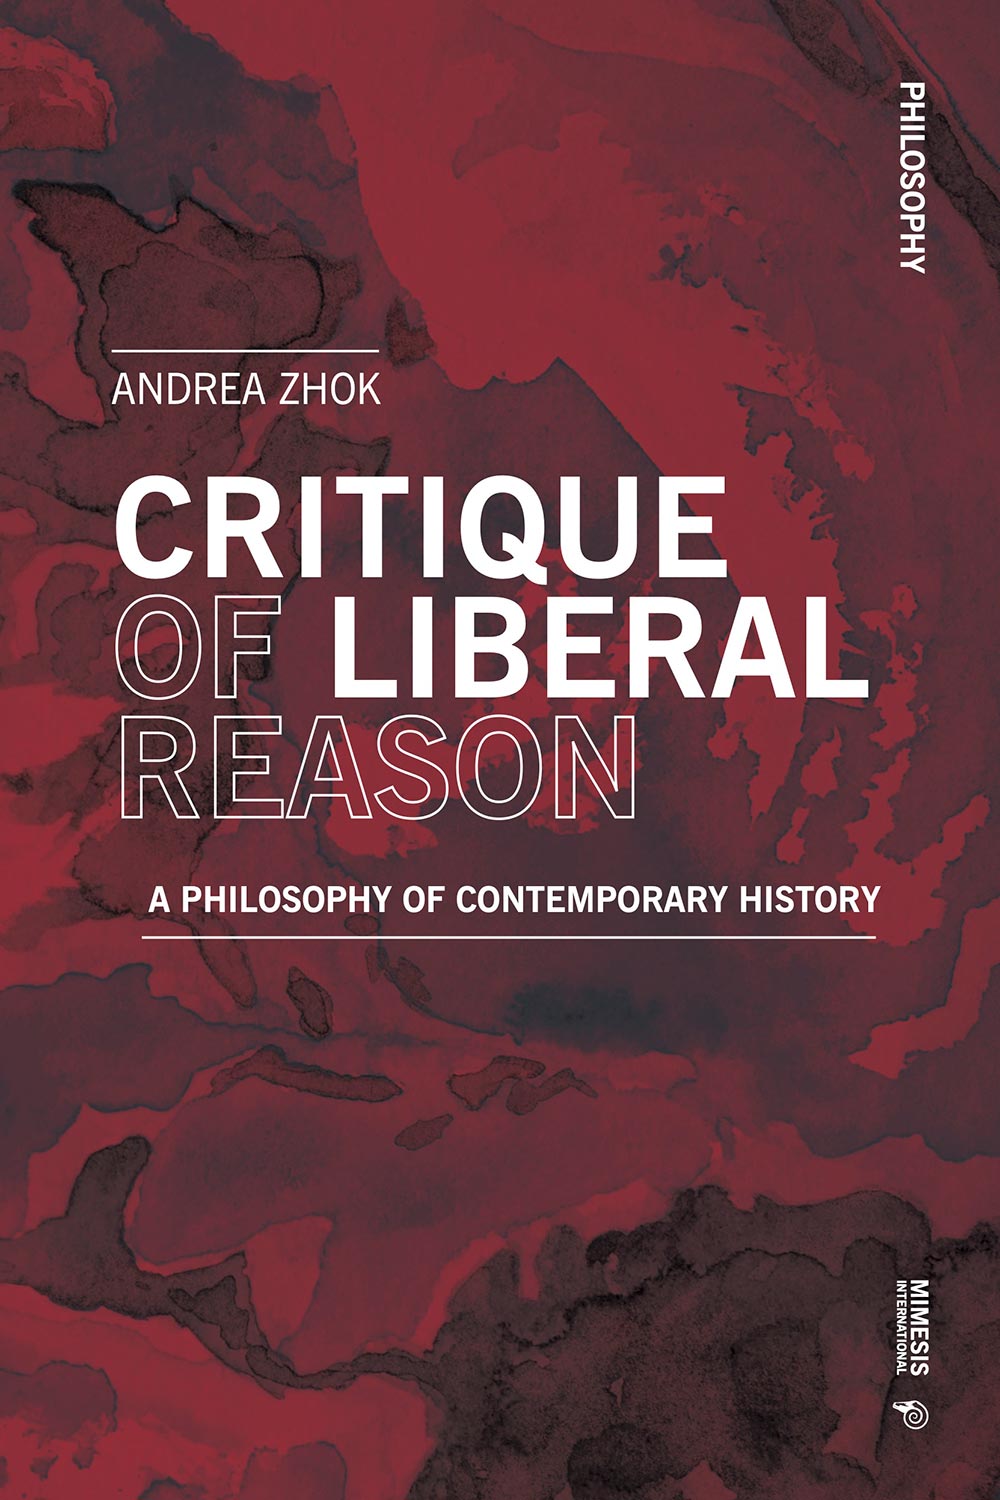 Critique of Liberal Reason. A Philosophy of Contemporary History